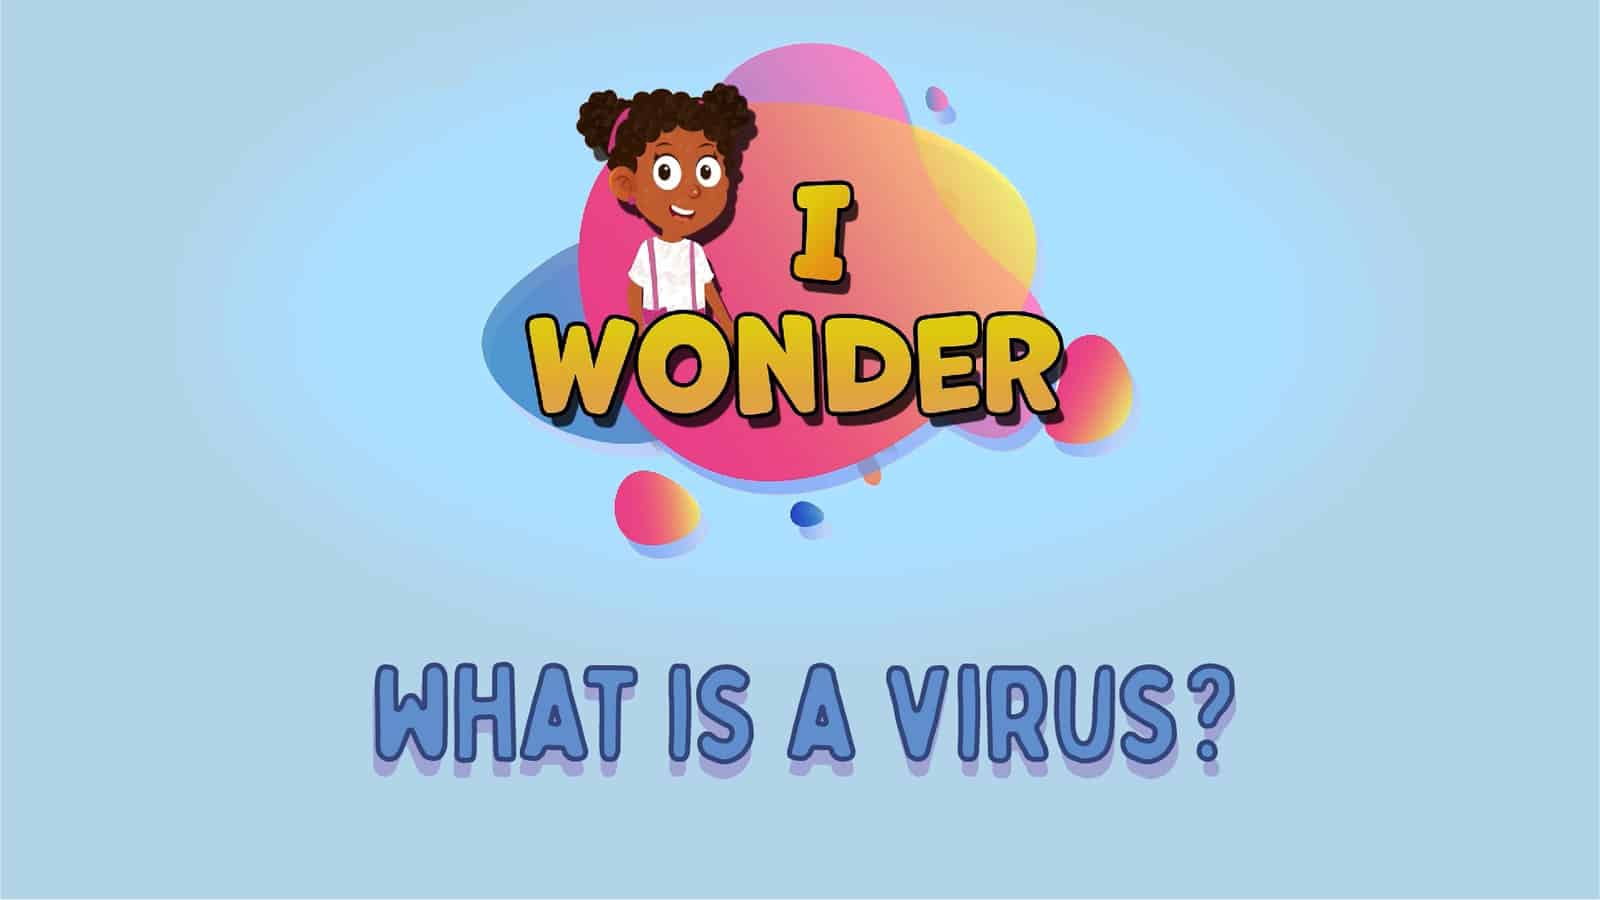 What Is A Virus?